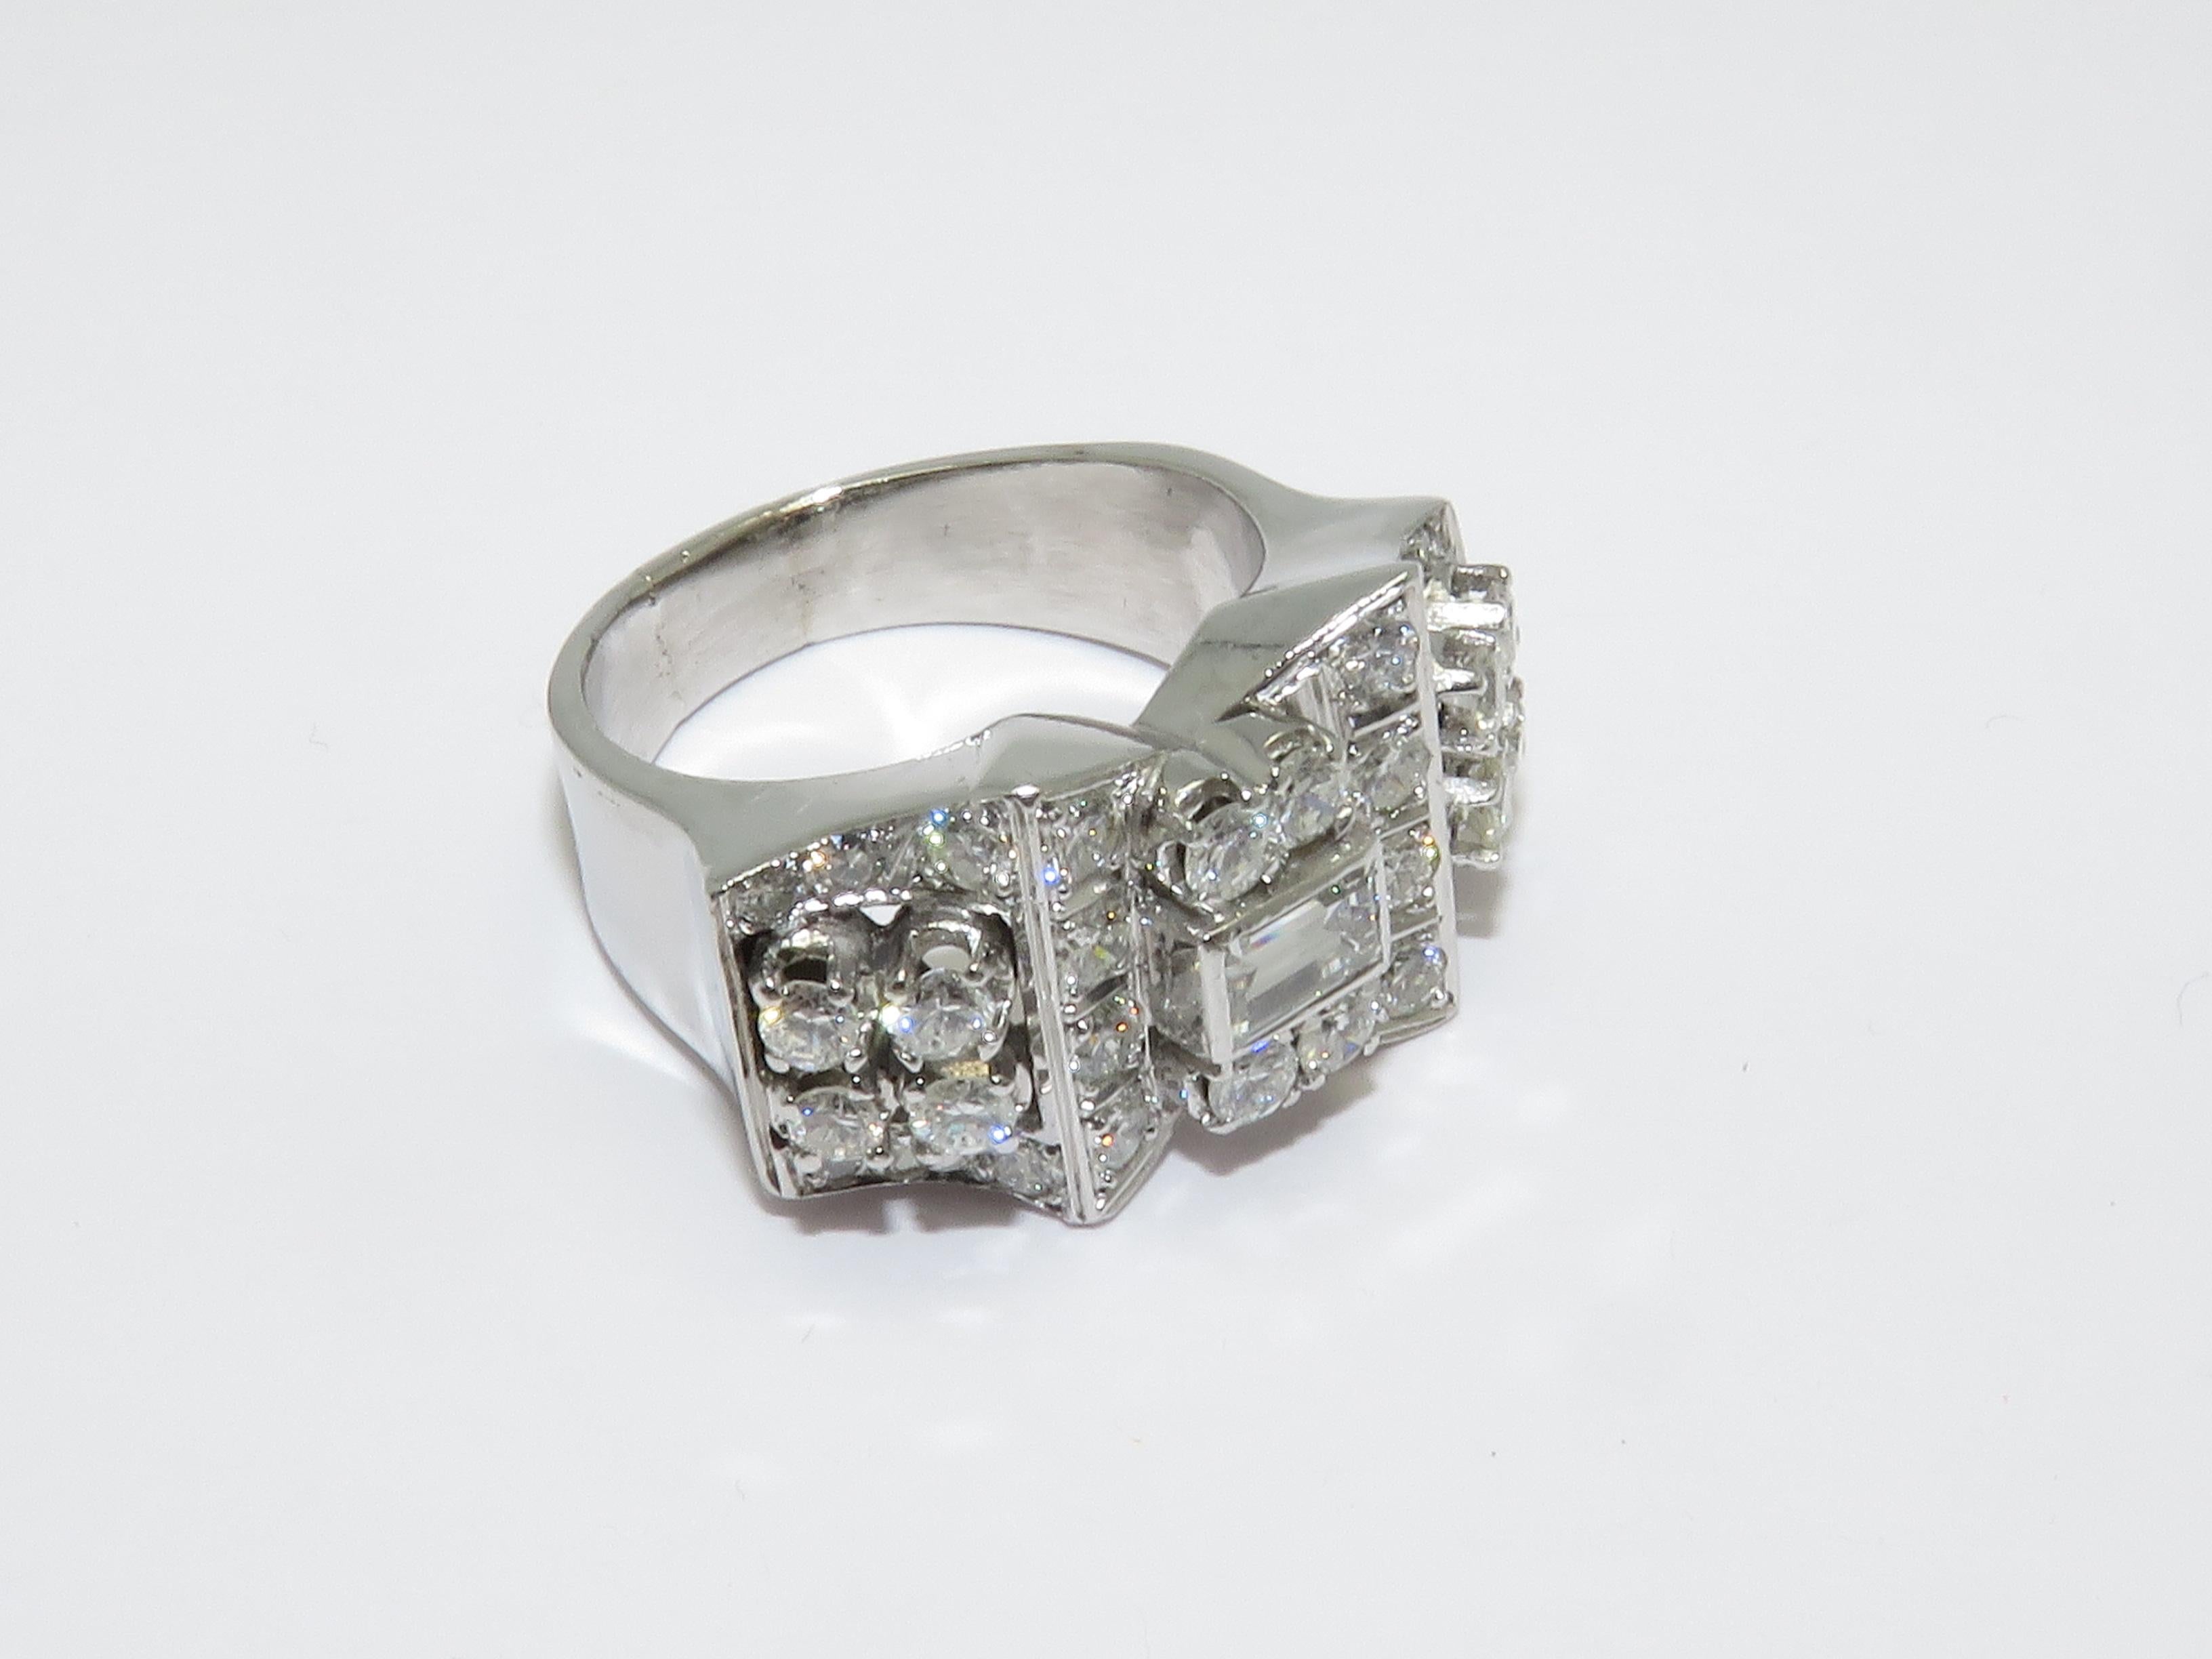 French platinum and diamond ring.
This elegant platinum ring from the Ard Deco era baguette cut diamond and round cut diamond.
Approximately 2.50 ct graded H color with Vs clarity.

It is currently size 7 1/8

Measurements:
Length: 2.30 cm   Width: